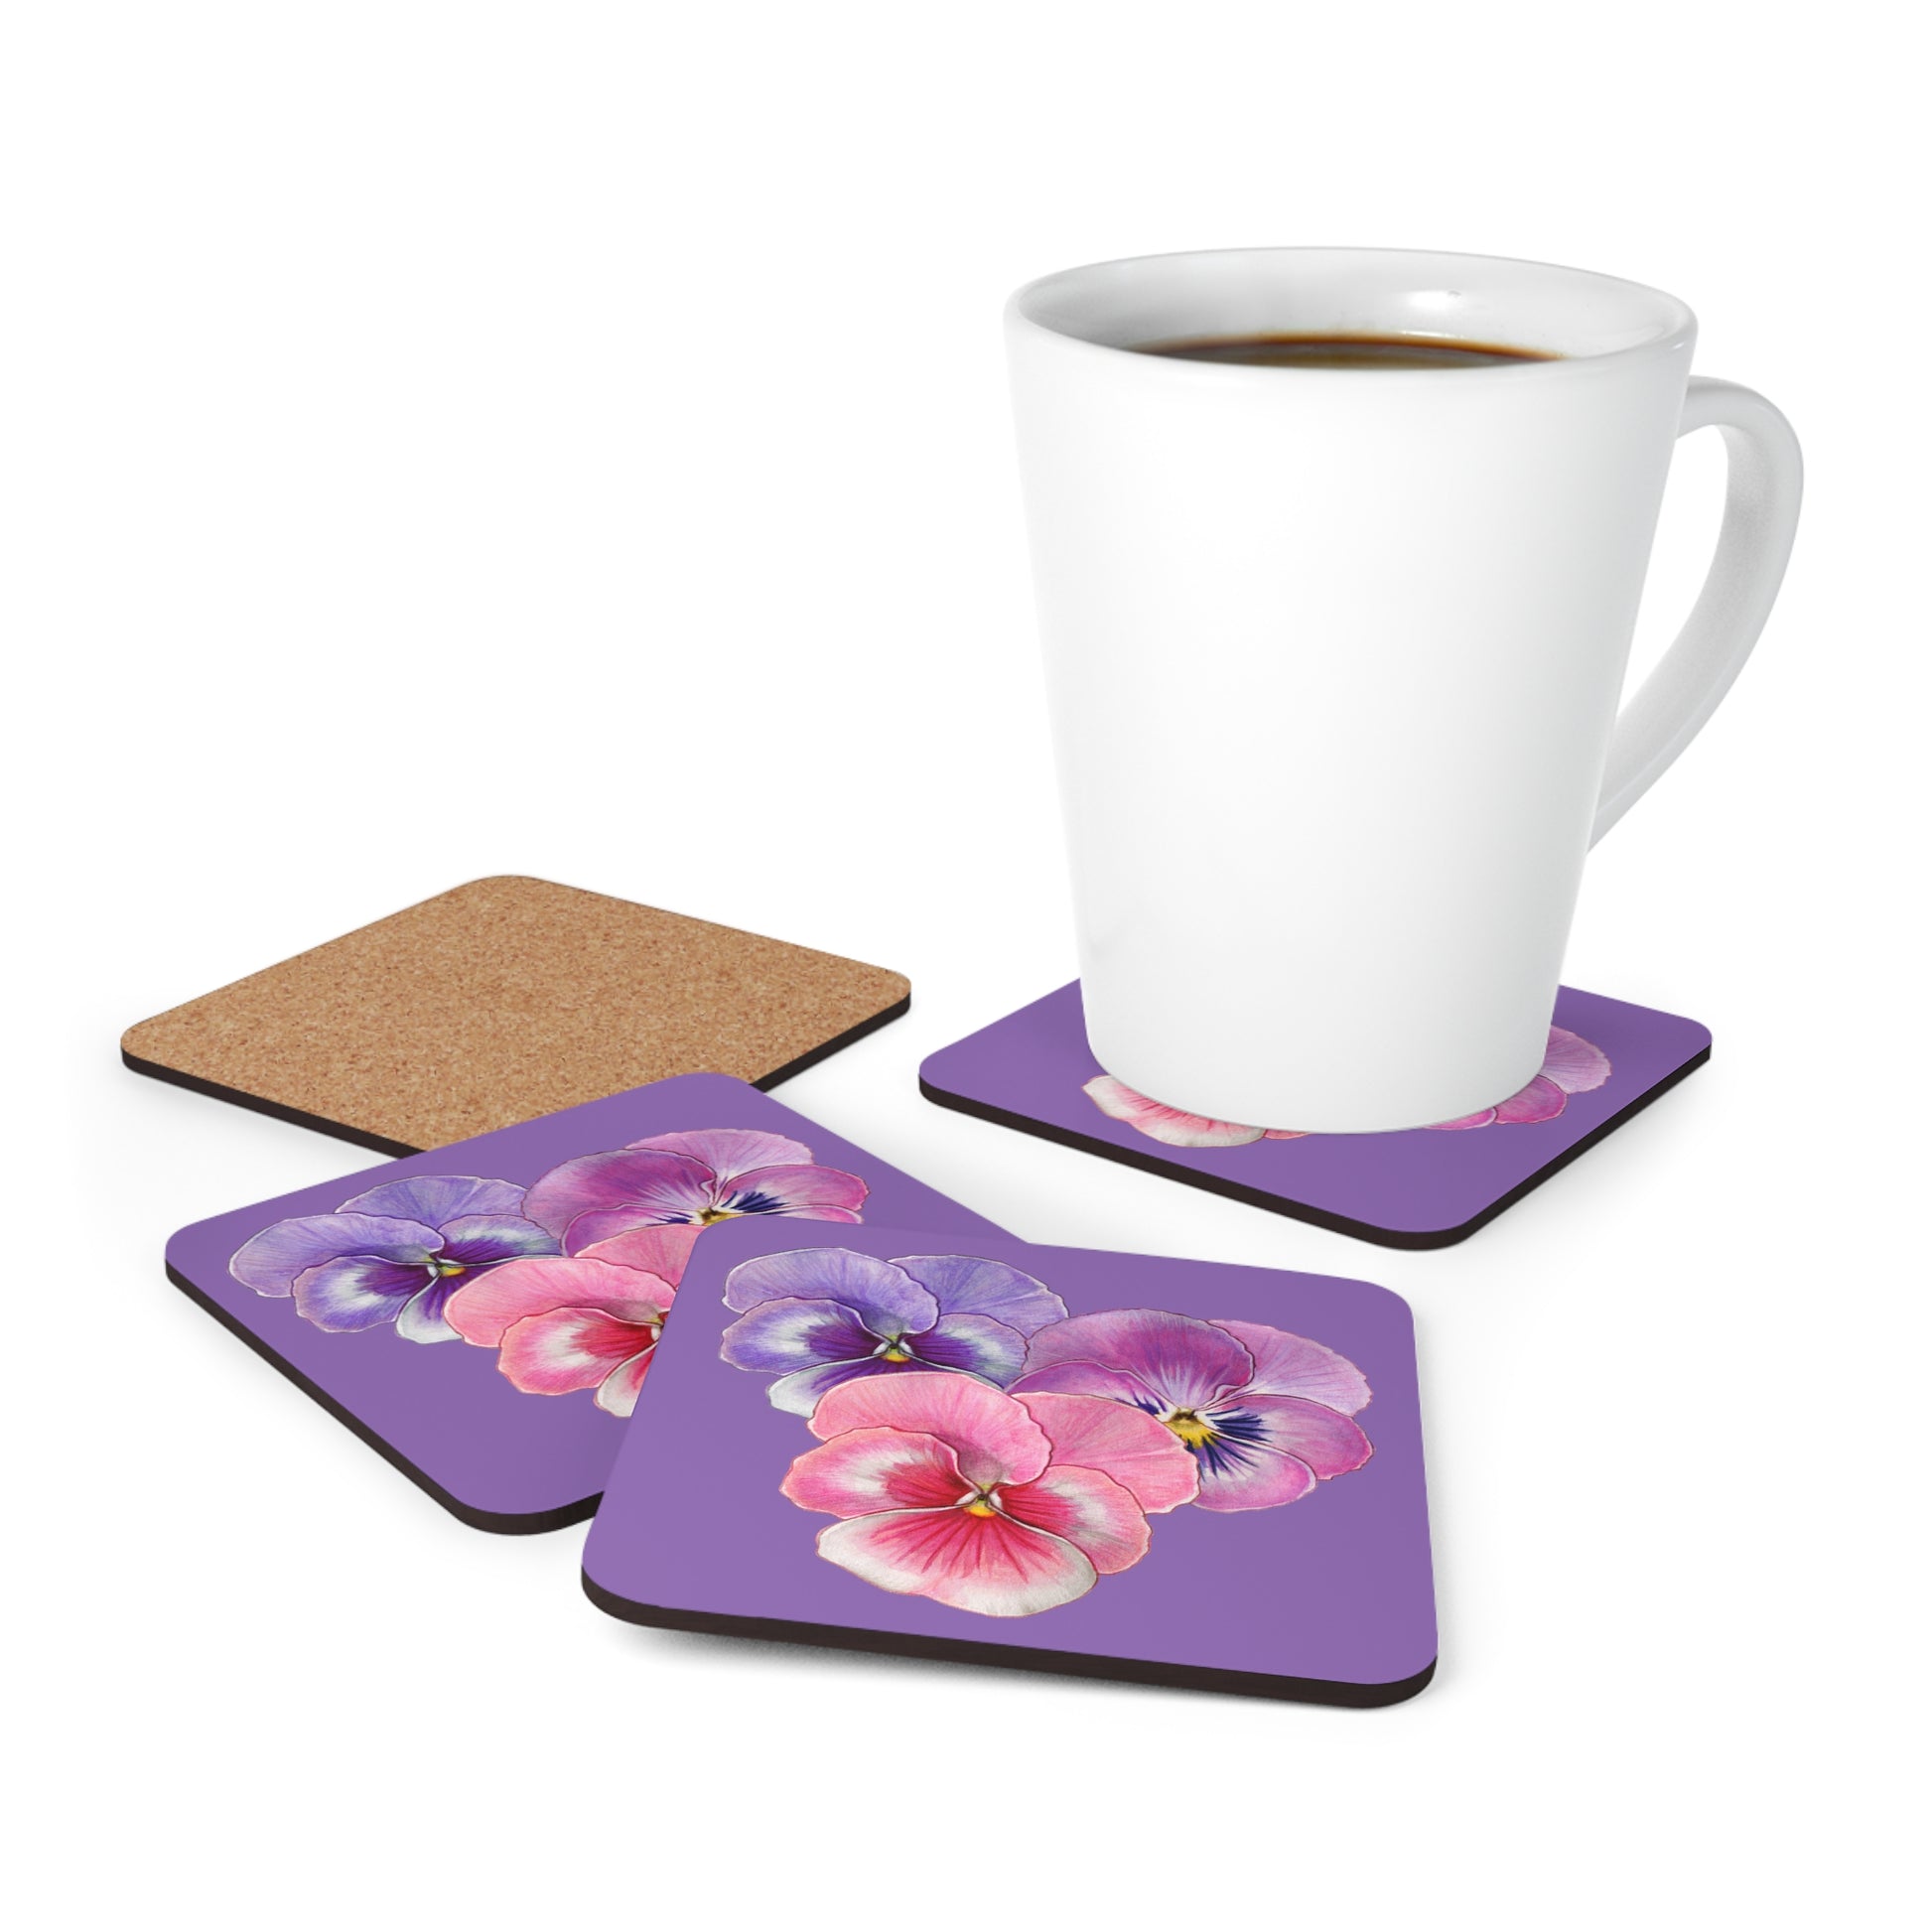 Mock up of a white Latte mug with the 4 coasters